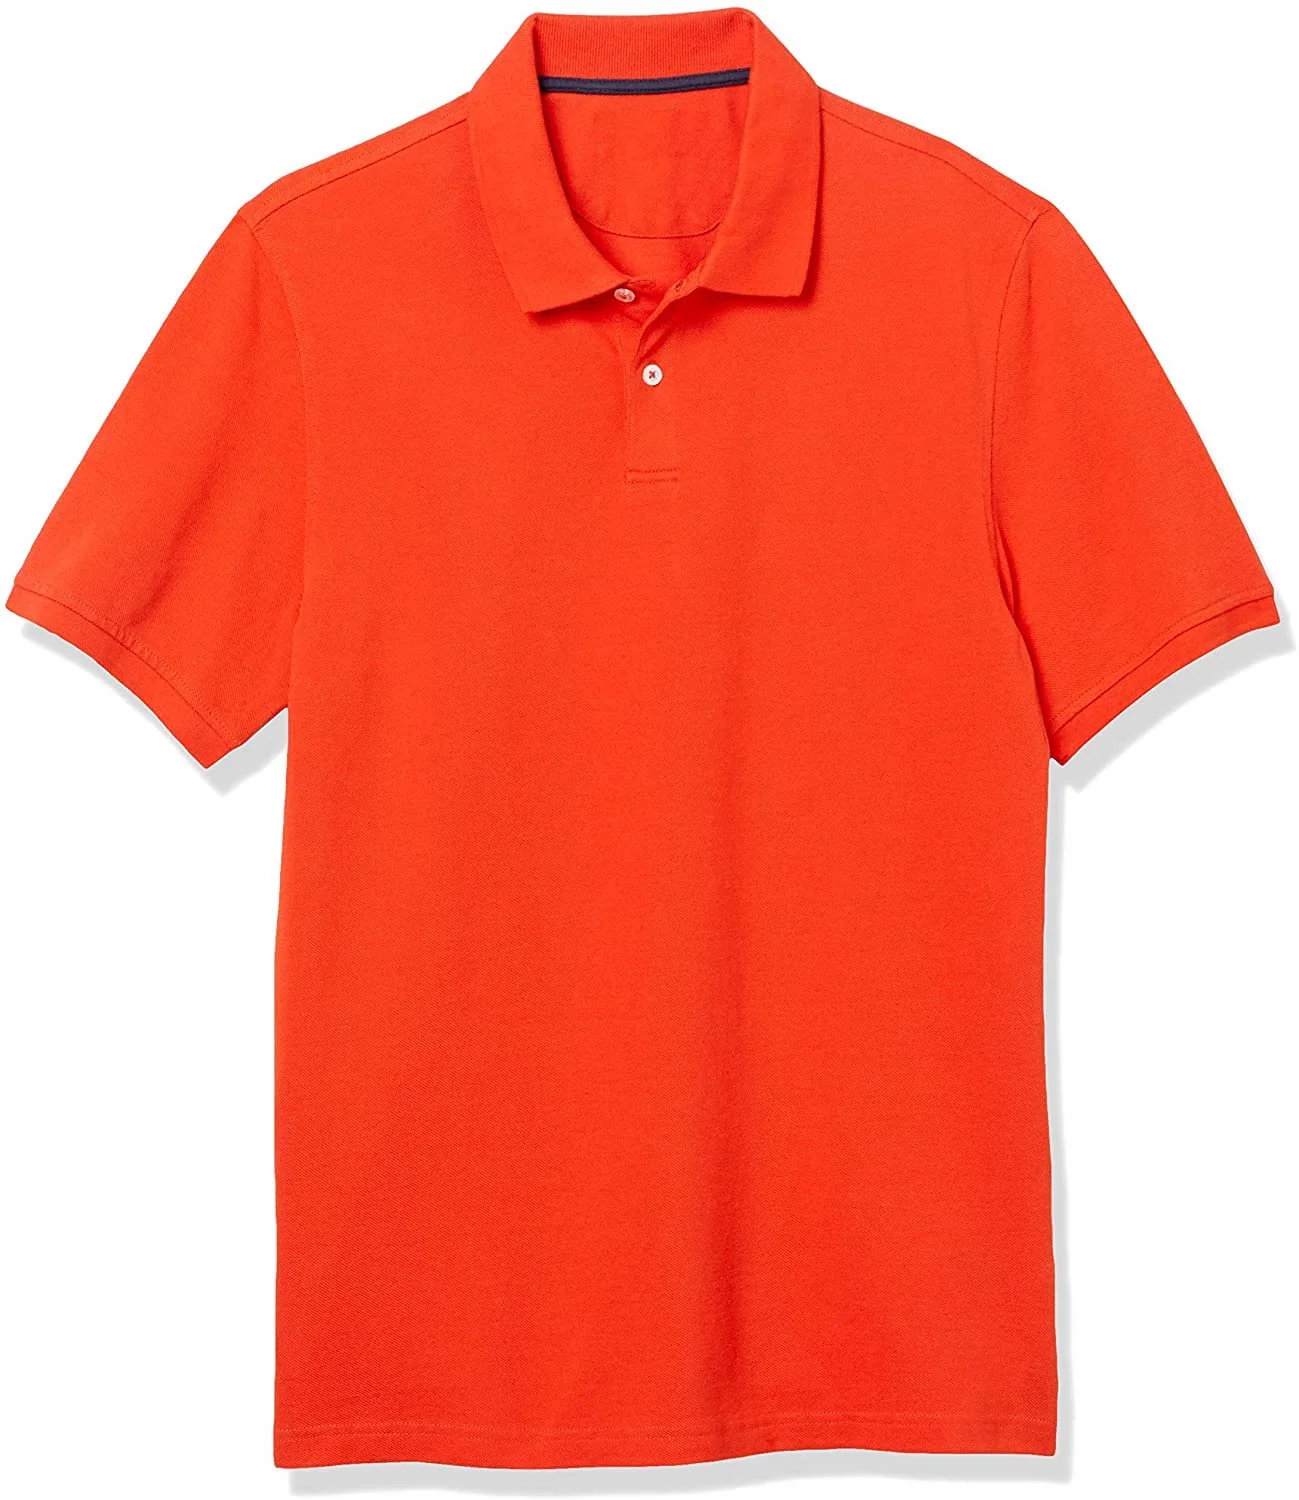 Wholesale Polo Shirts from Bangladesh Garments Manufacturer